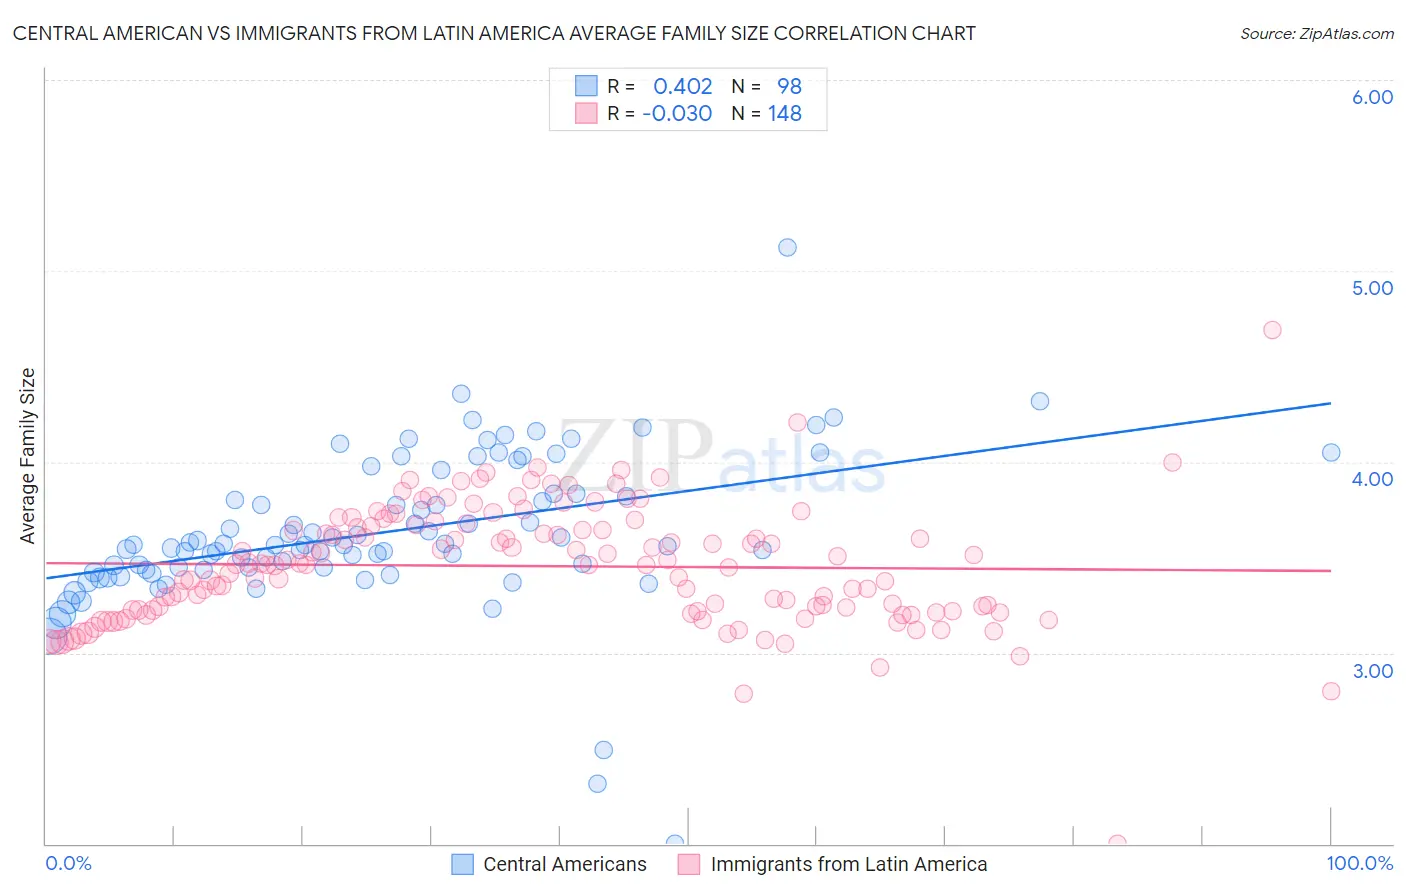 Central American vs Immigrants from Latin America Average Family Size